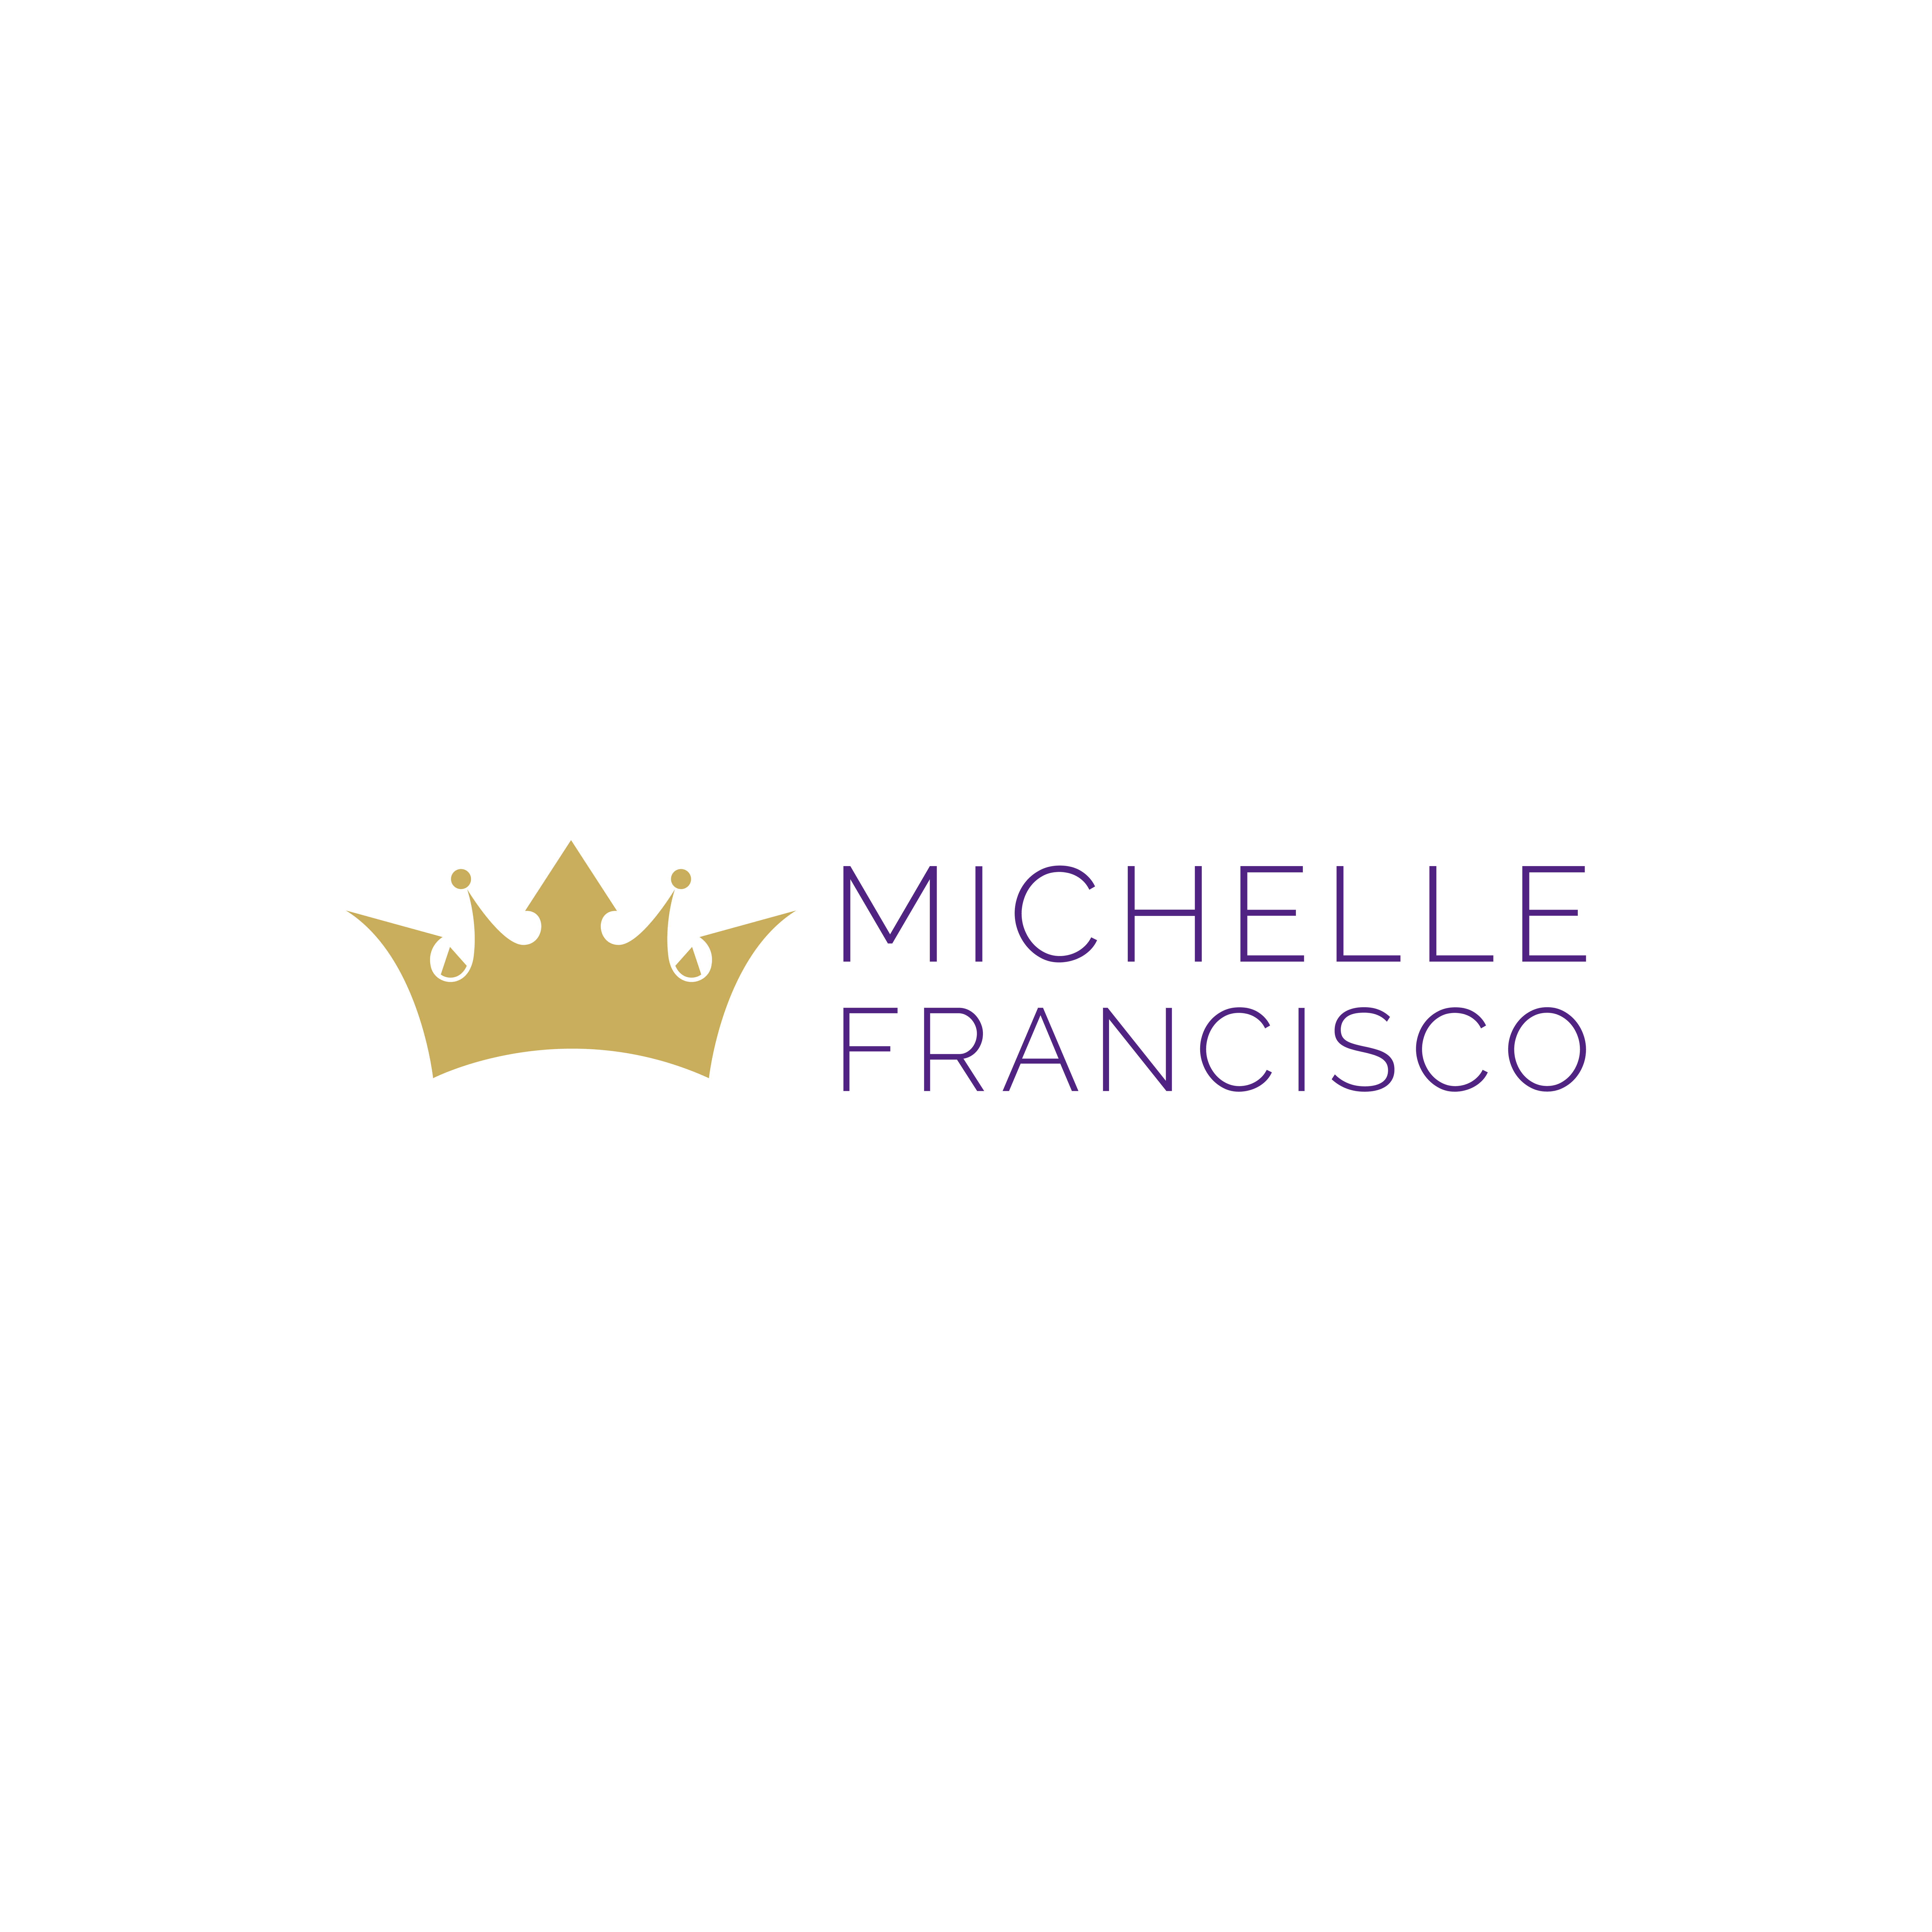 Michelle Francisco Introduces Its Range of Vegan and Eco-friendly Beauty Products